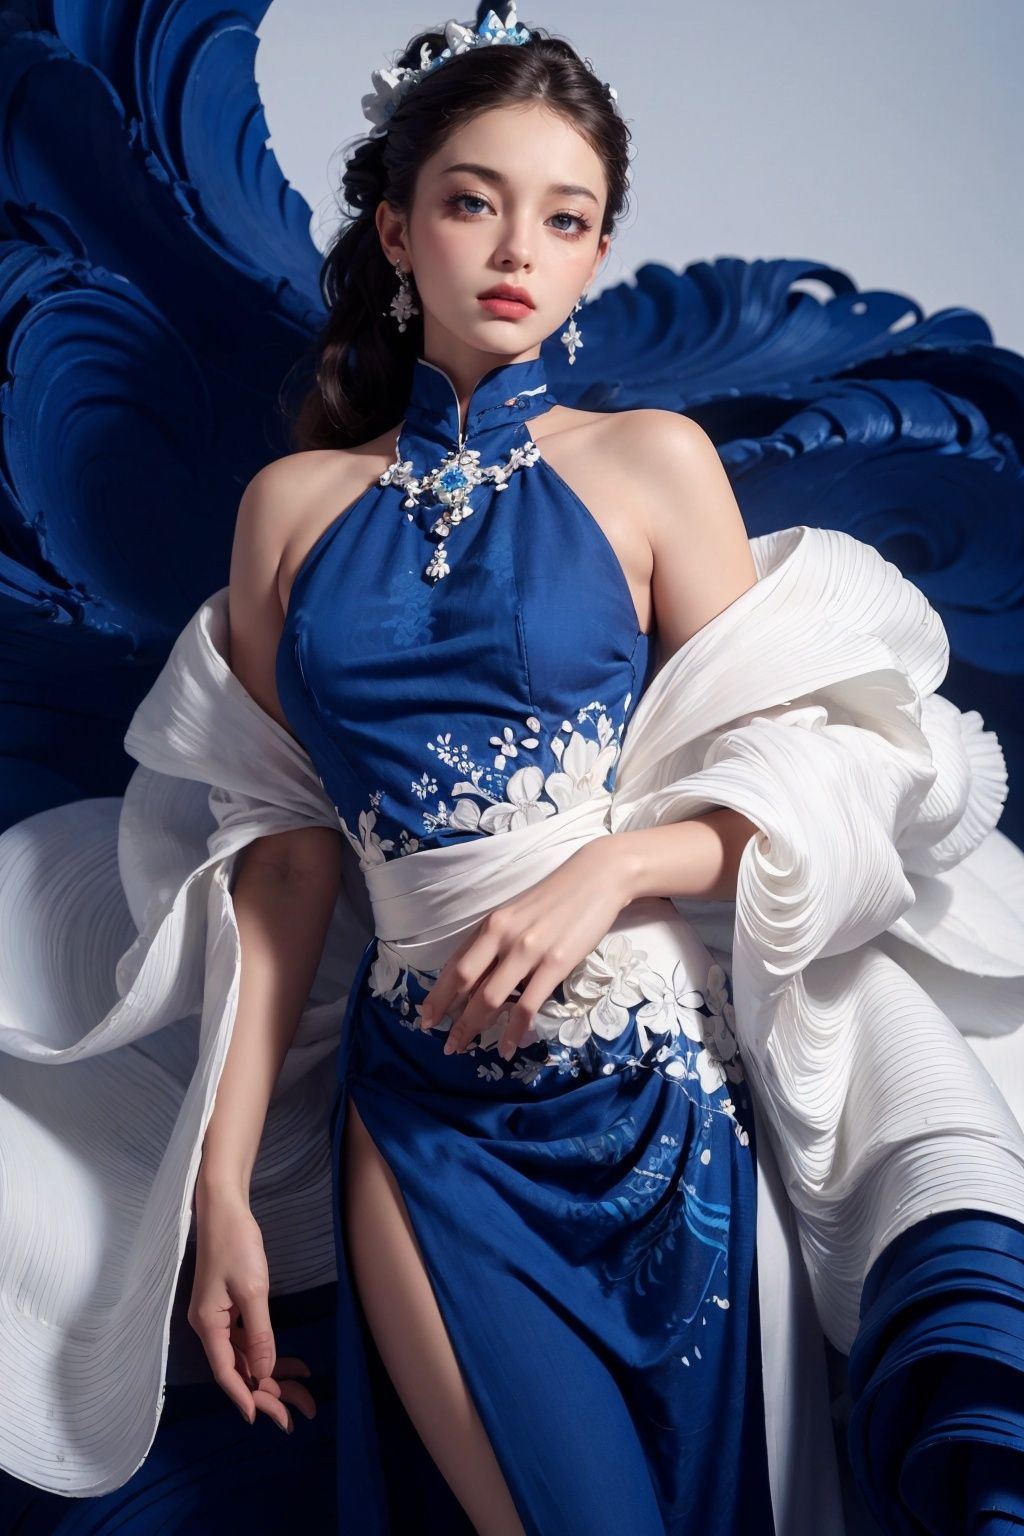  (best quality), (realistic medium, photo realistic: 1.3), (masterpiece: 1.3), 1 girl, blue dress, cascading dress, extremely delicate and beautiful, beautiful and meticulous girl, abstract wave cave background, blue and white background, (fractal art: 1.3), extremely rich in color, extremely detailed, Fashion Style